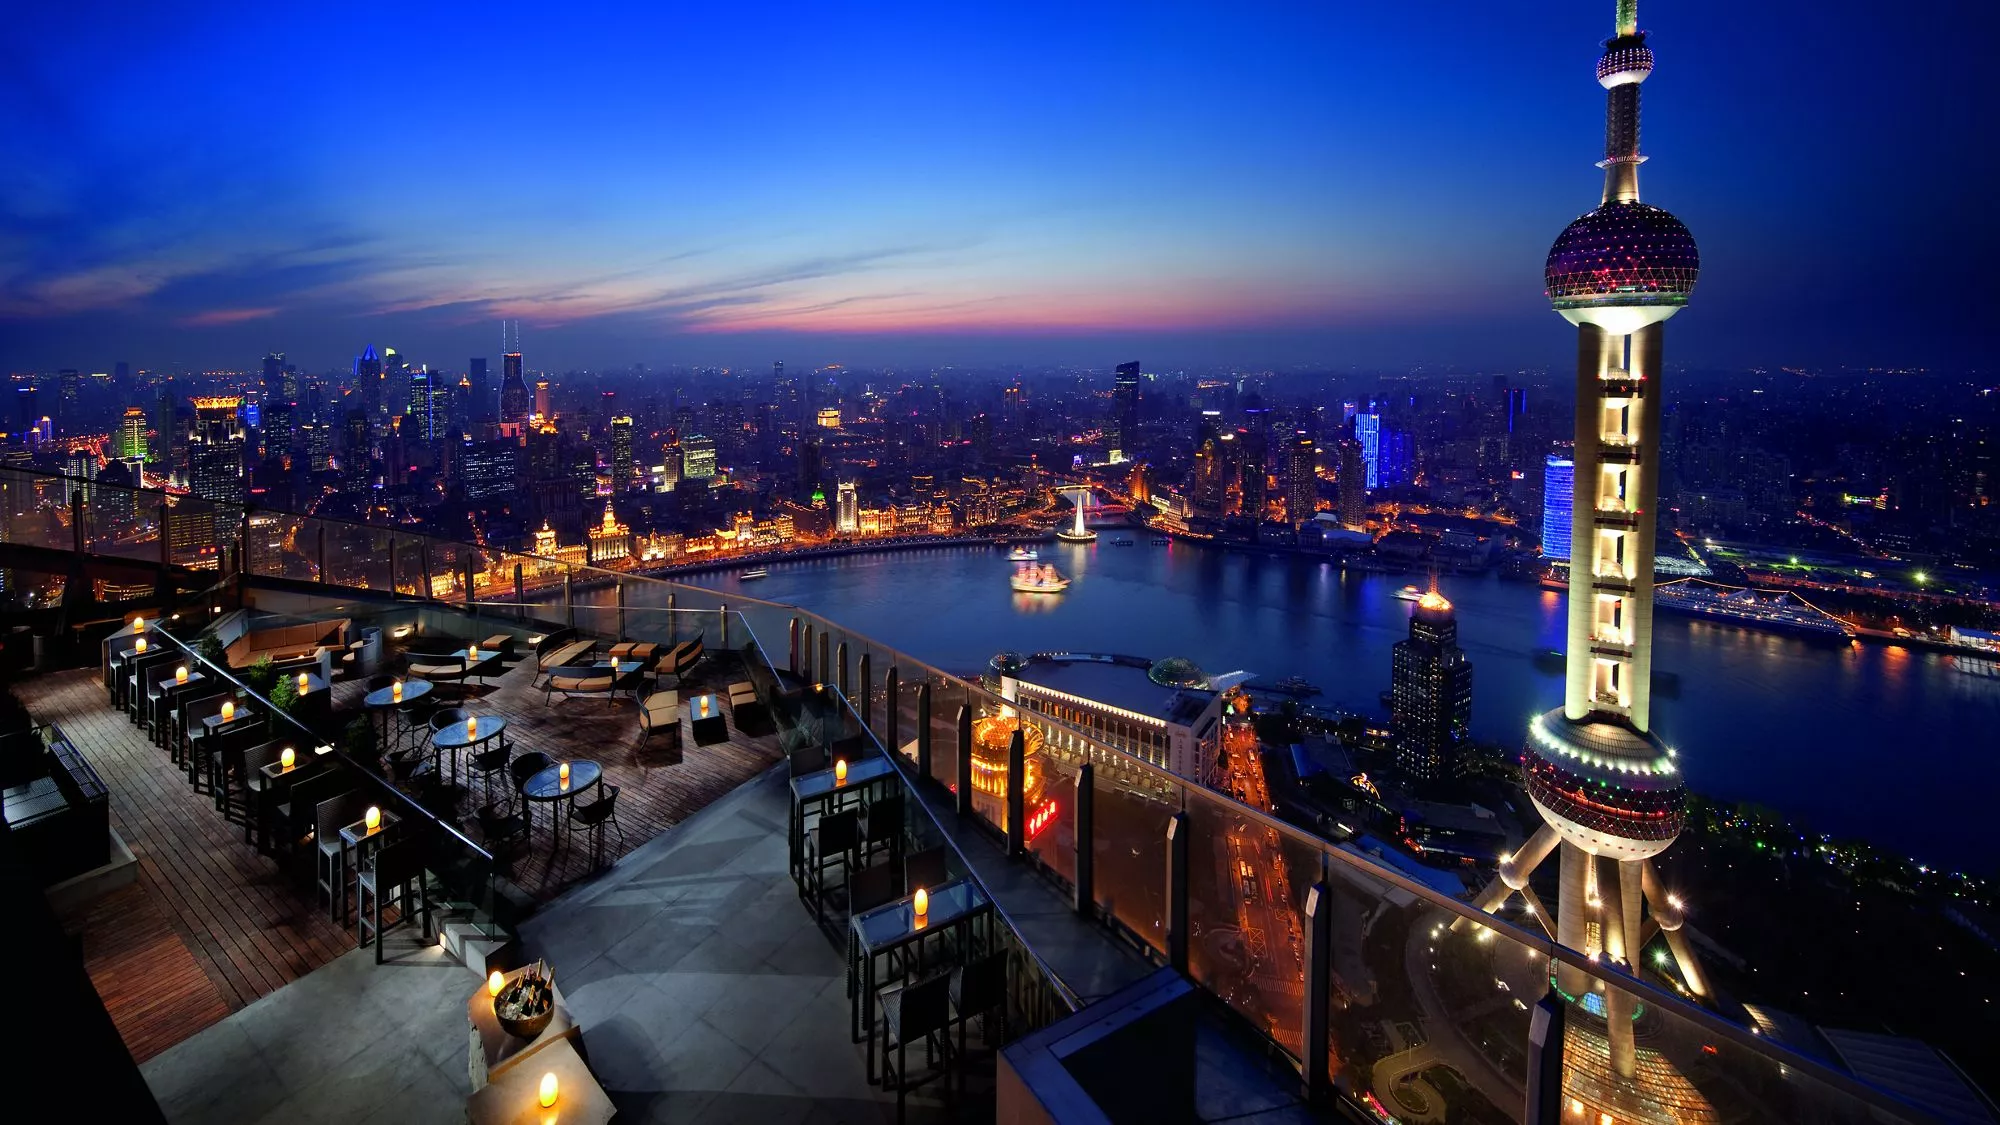 Flair in China, East Asia | Observation Decks,Bars - Rated 4.1